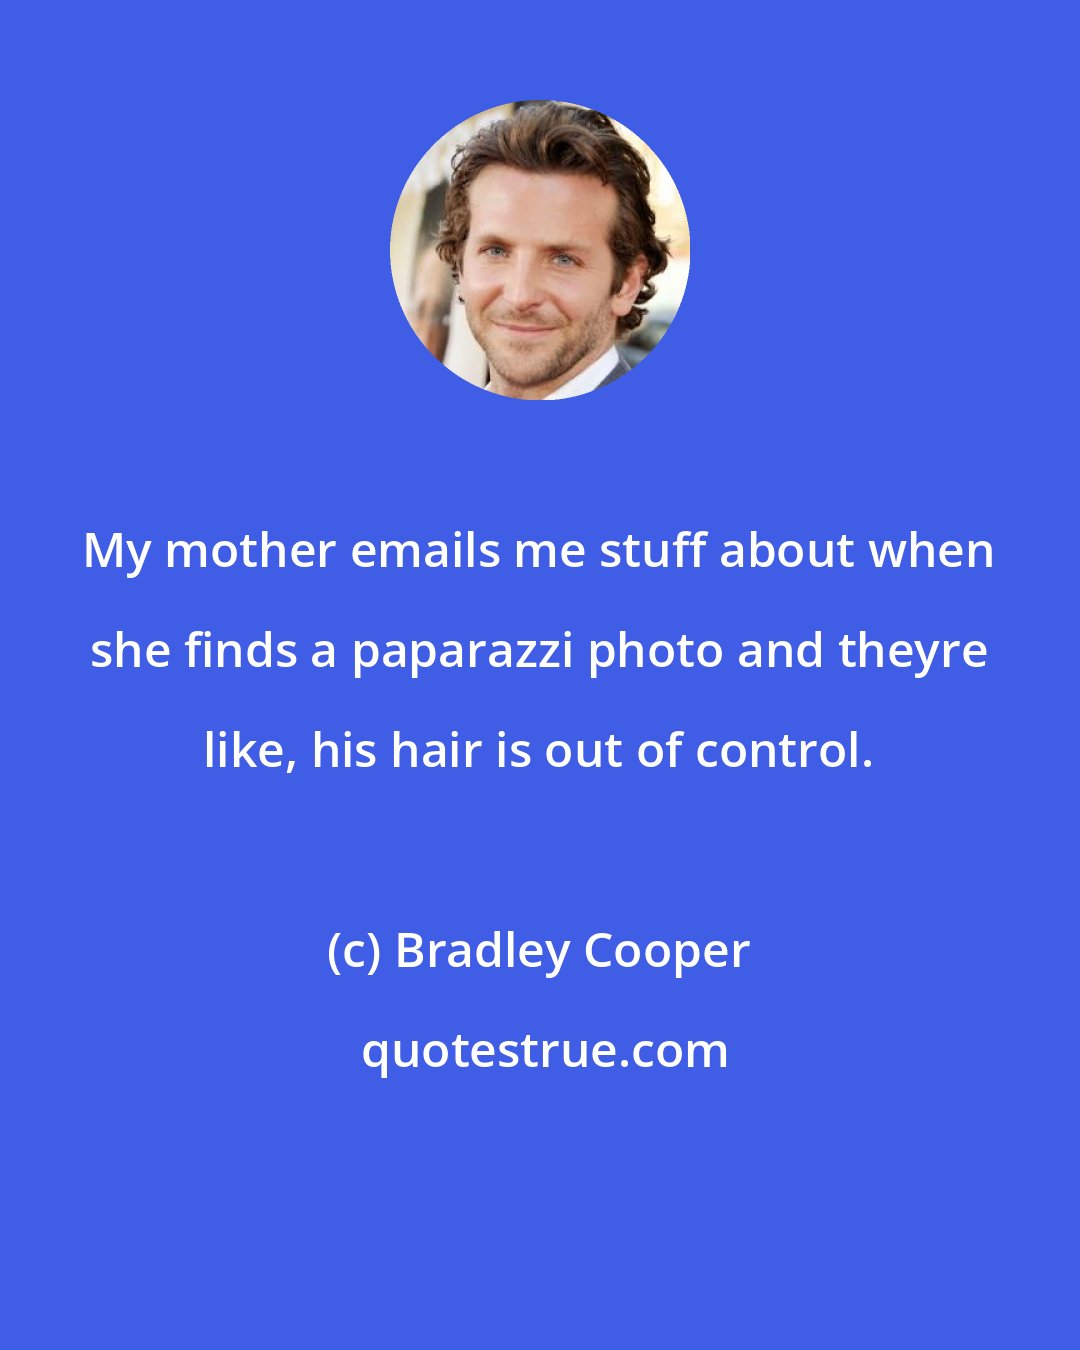 Bradley Cooper: My mother emails me stuff about when she finds a paparazzi photo and theyre like, his hair is out of control.